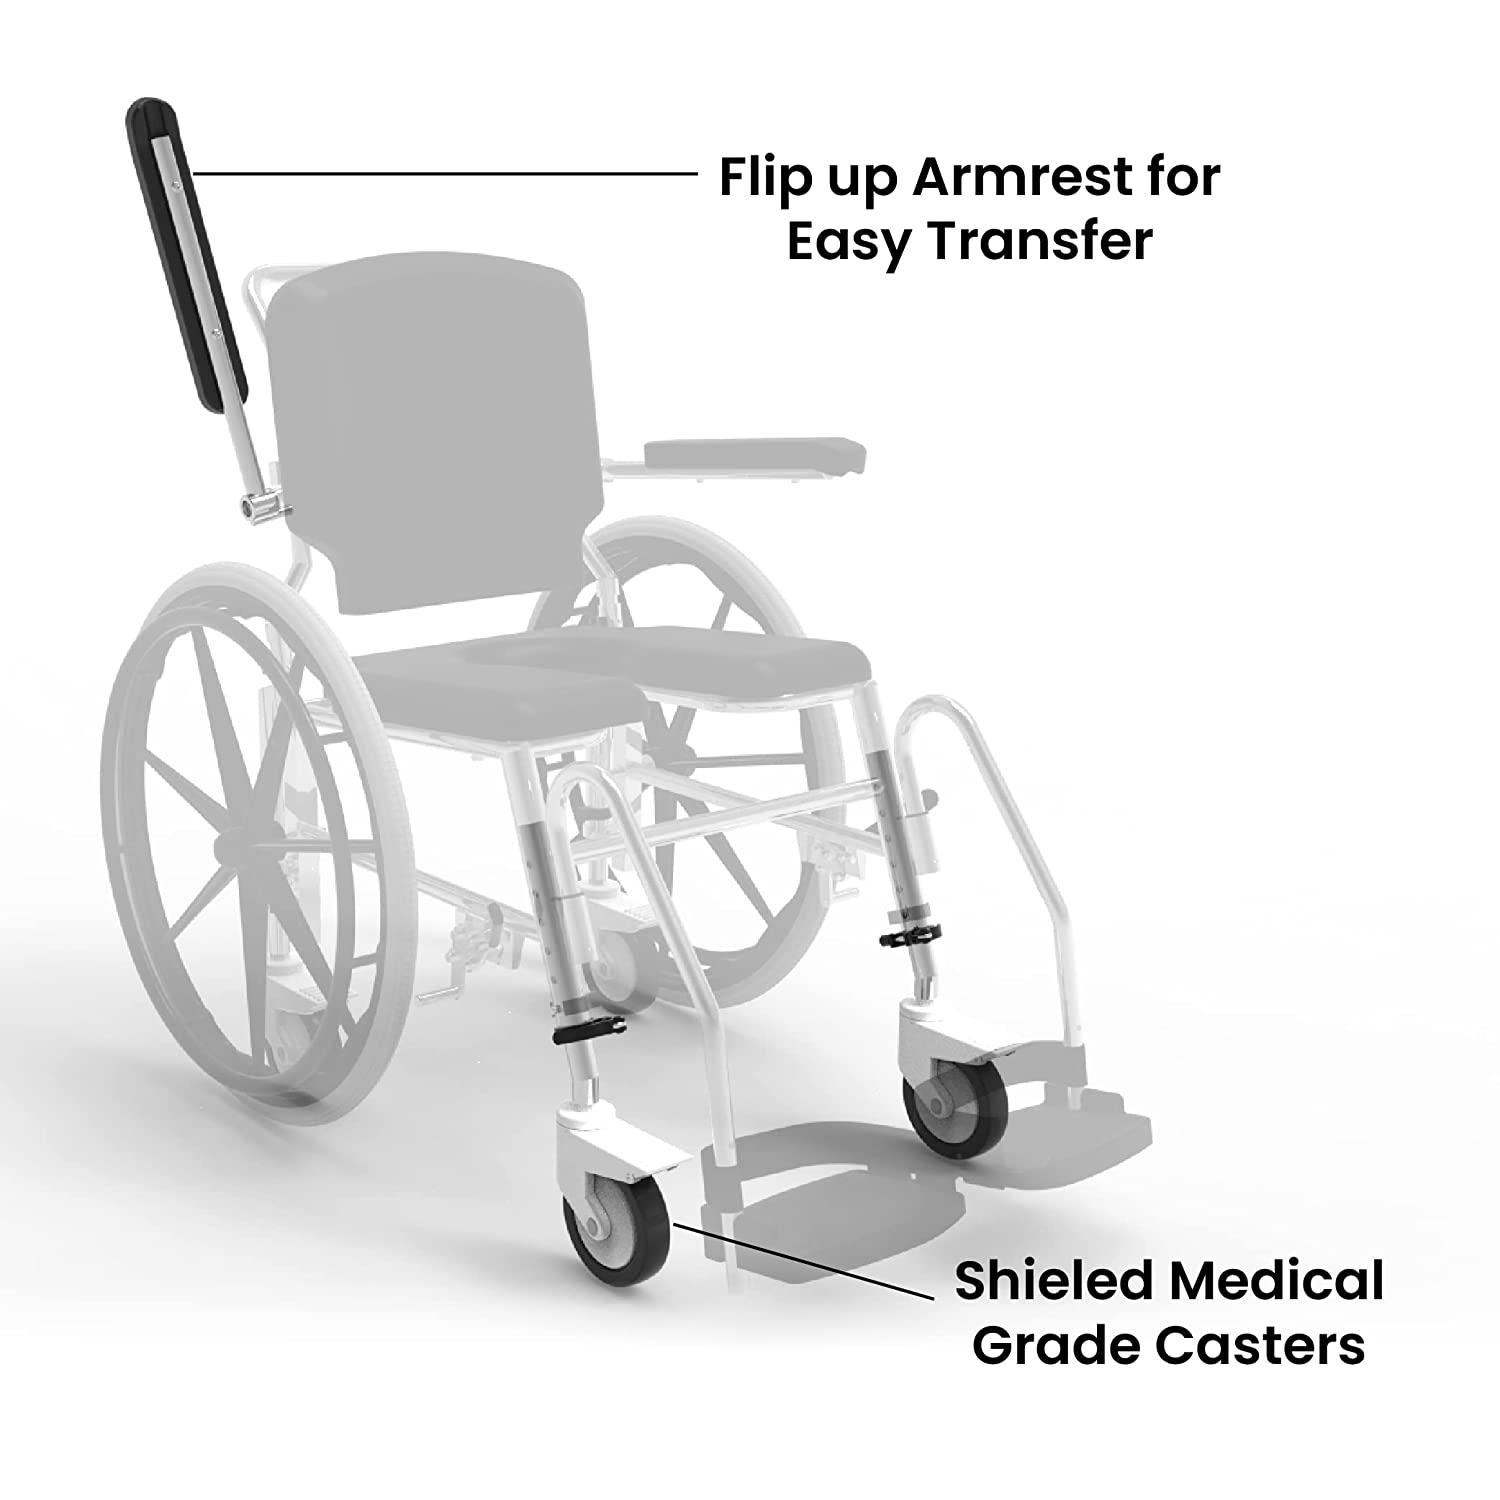 Arcatron Prime SSS100 | Self Propelled Shower Commode Wheelchair